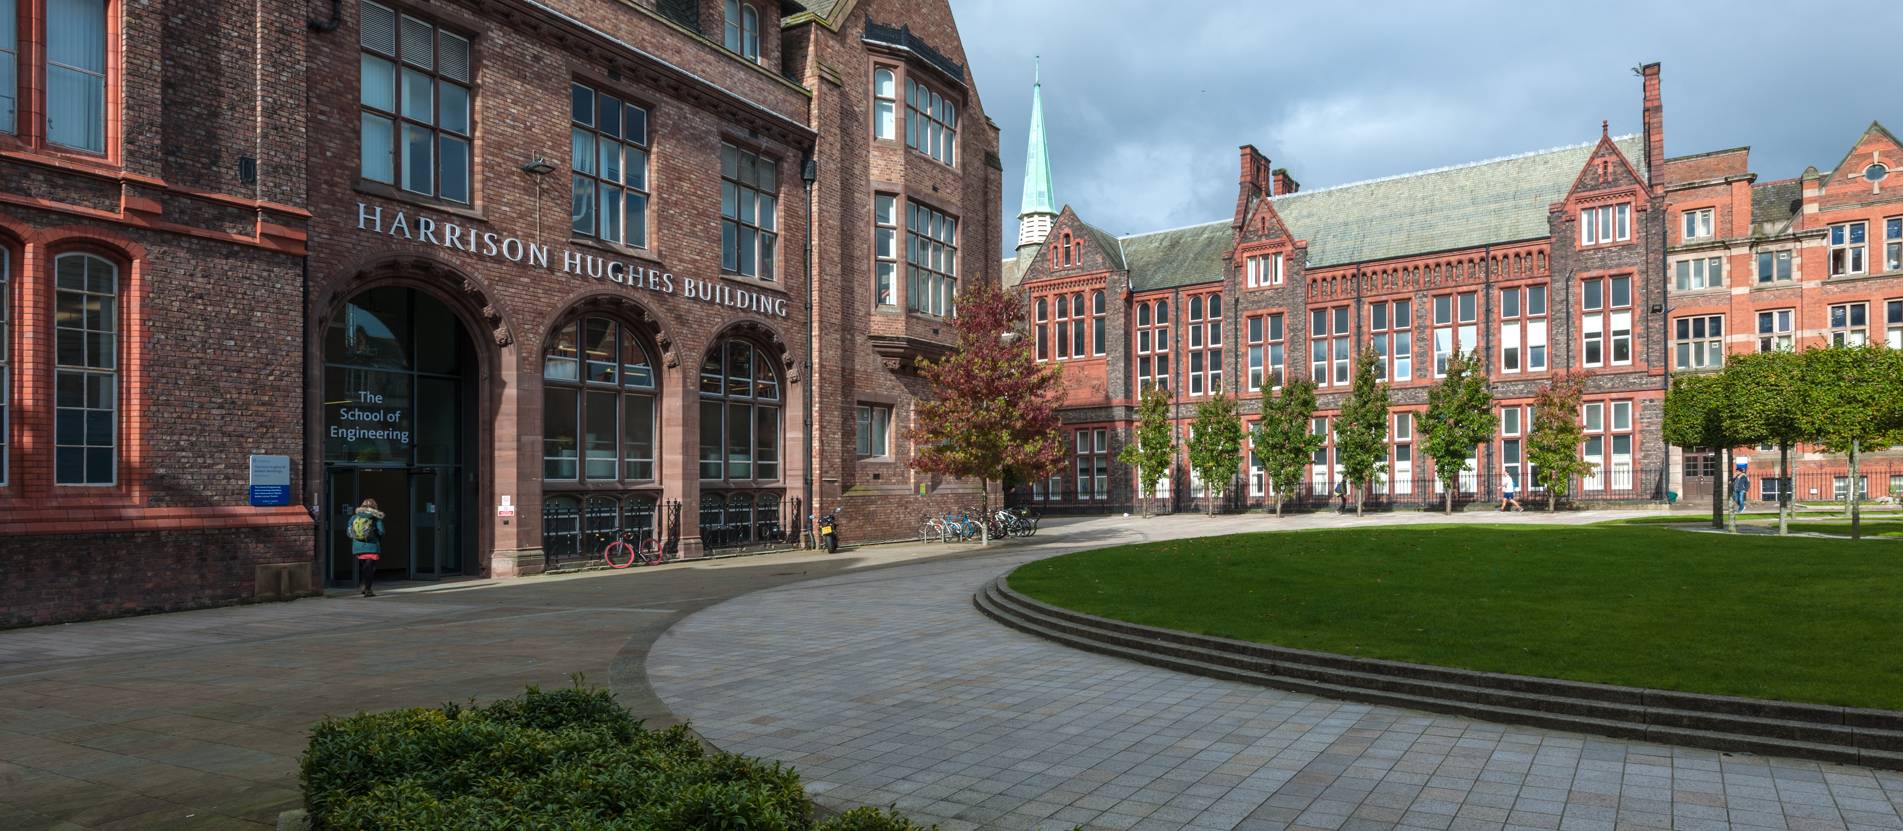 This is a picture of the Harrison Hughes Building in the Quad on the North Campus,  University of Liverpool